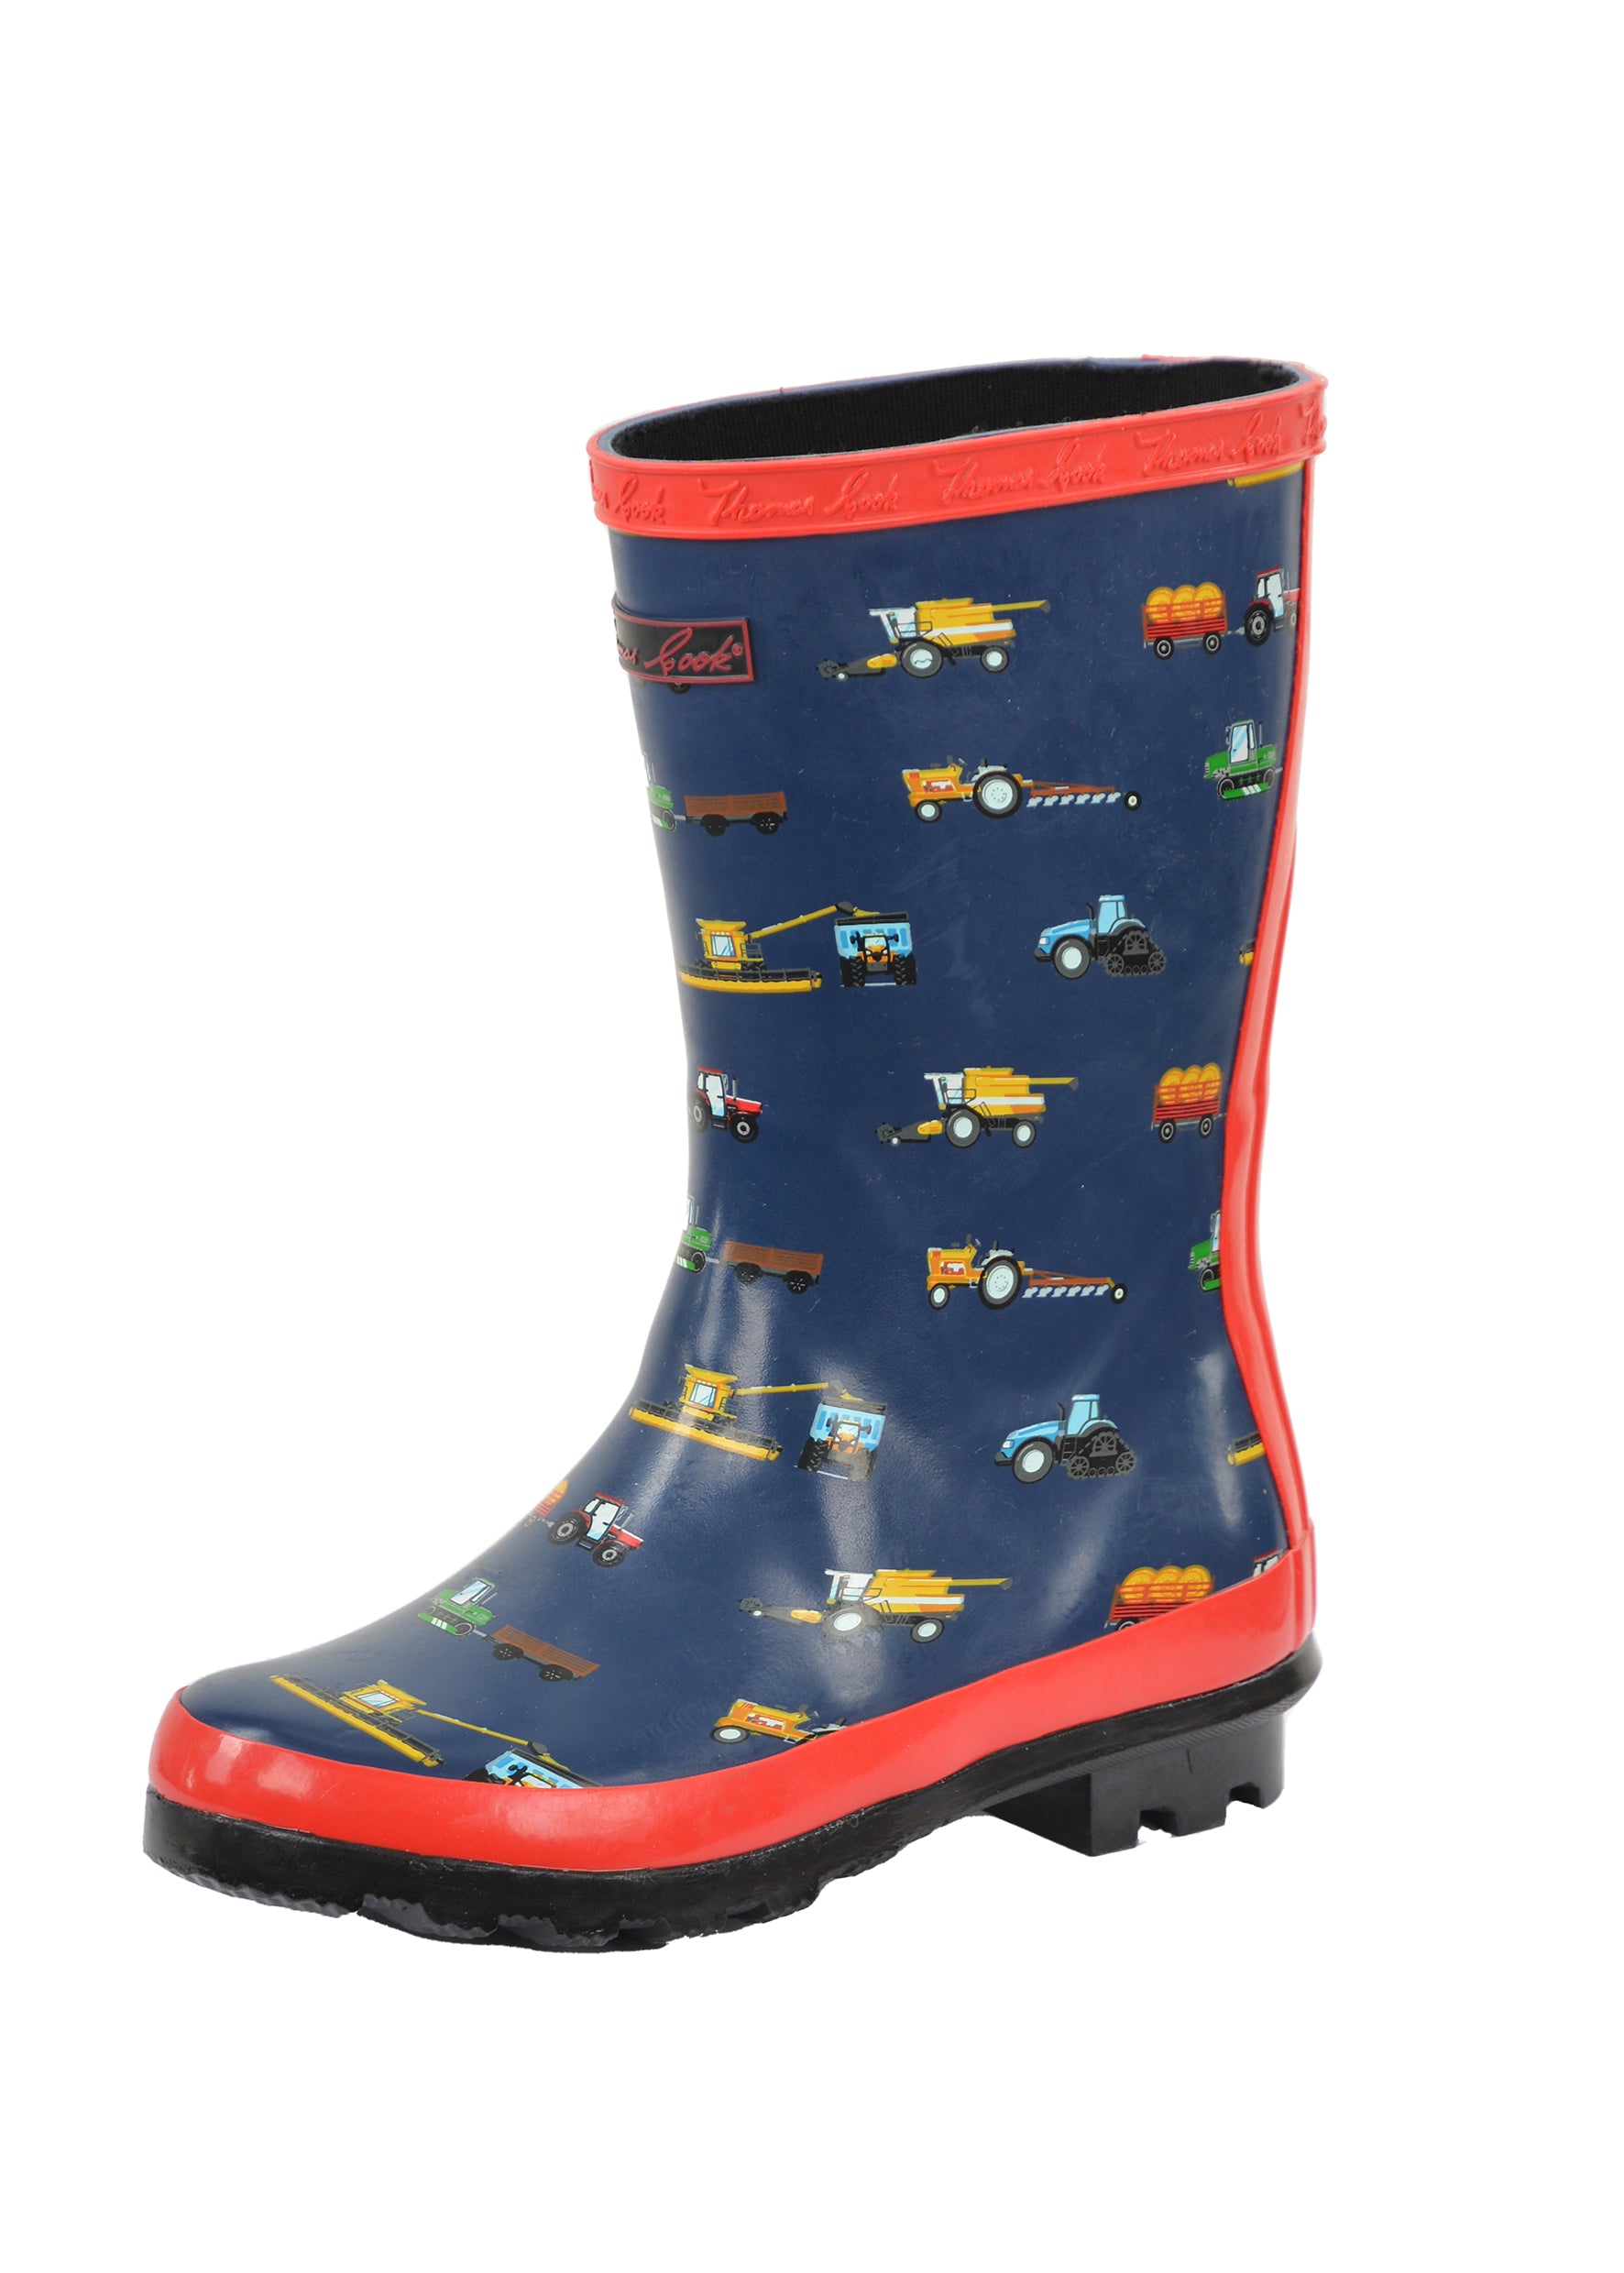 Thomas Cook Farm Vehicles Gumboot - CLEARANCE